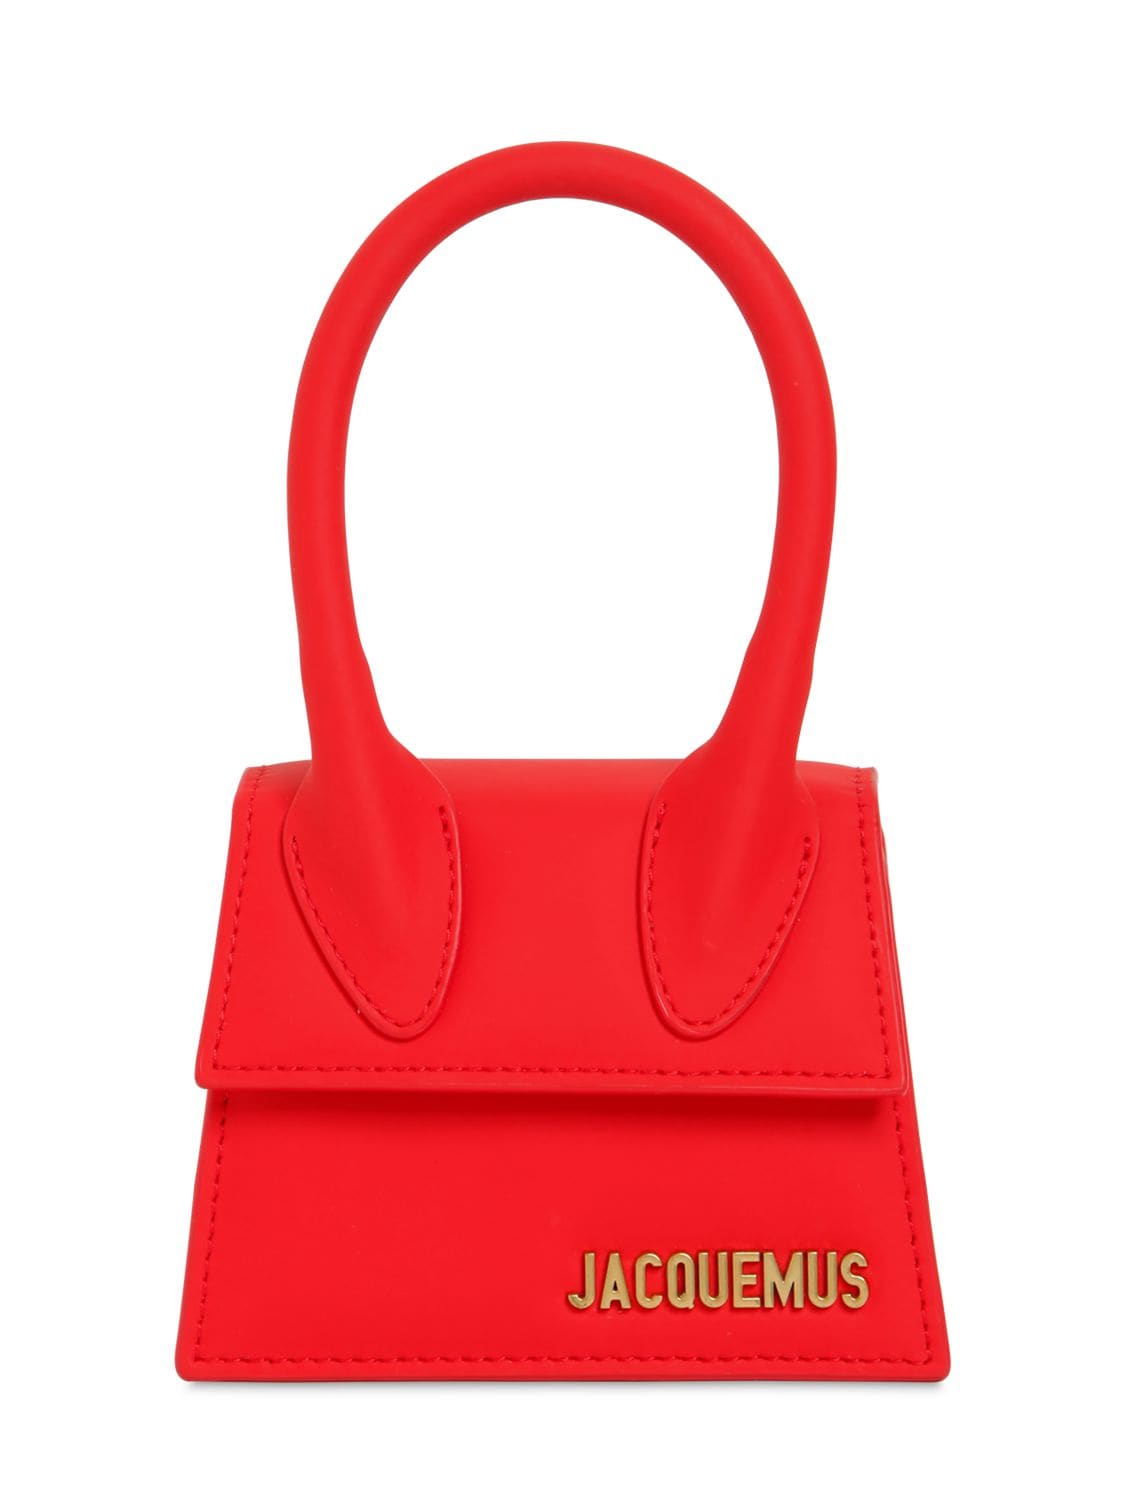 Jacquemus Le Chiquito Matte Leather Bag In Red